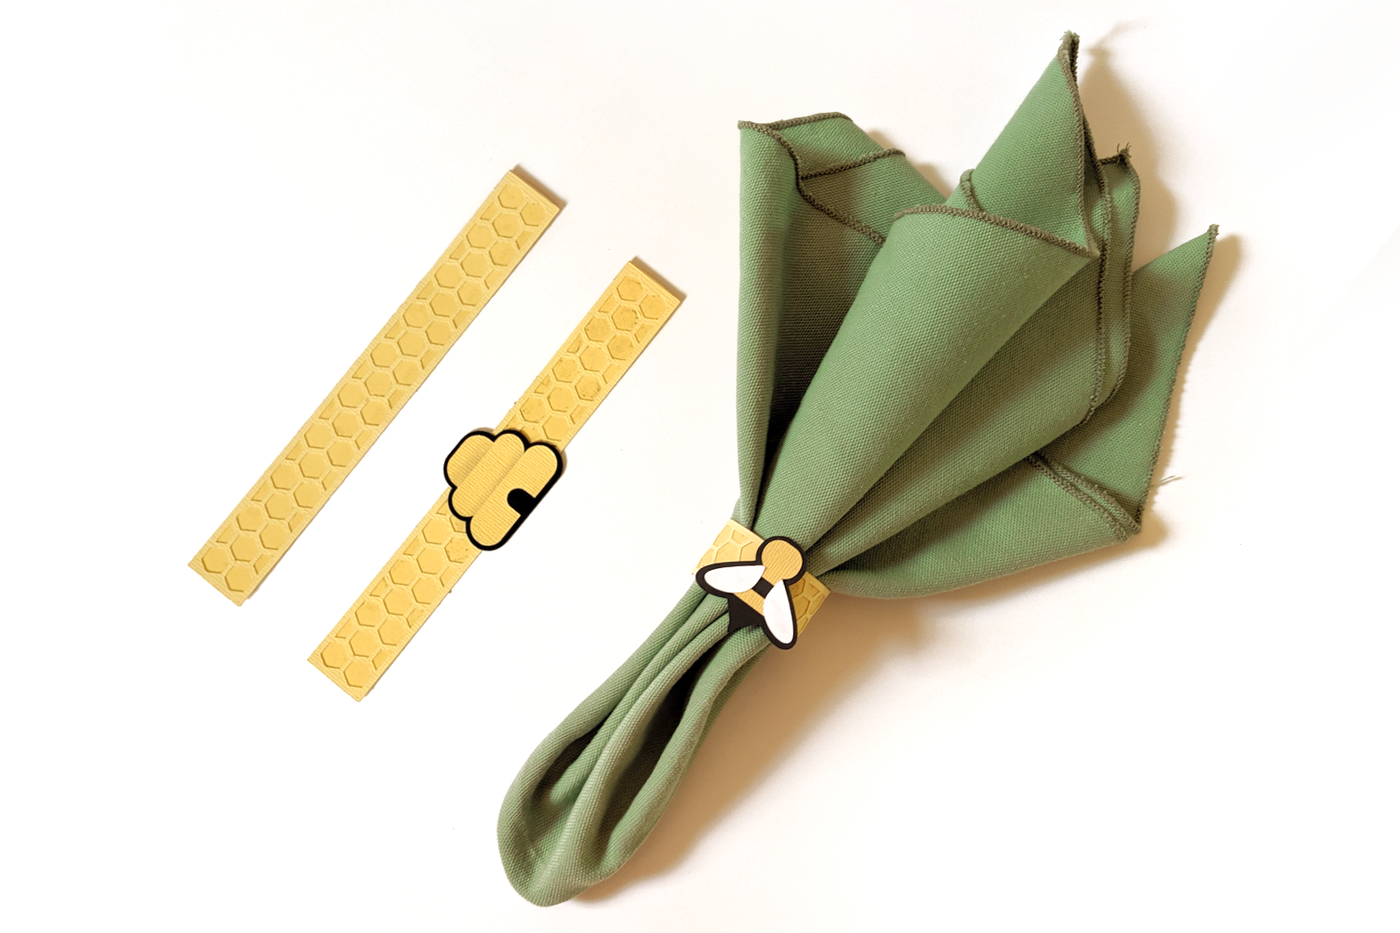 A sage green napkin on a white background. The napkin has a paper ring with a honeycomb pattern and a stylized simple bee. There are 2 more napkin rings laid flat nearby. One has a beehive, the other just has the honeycomb pattern.